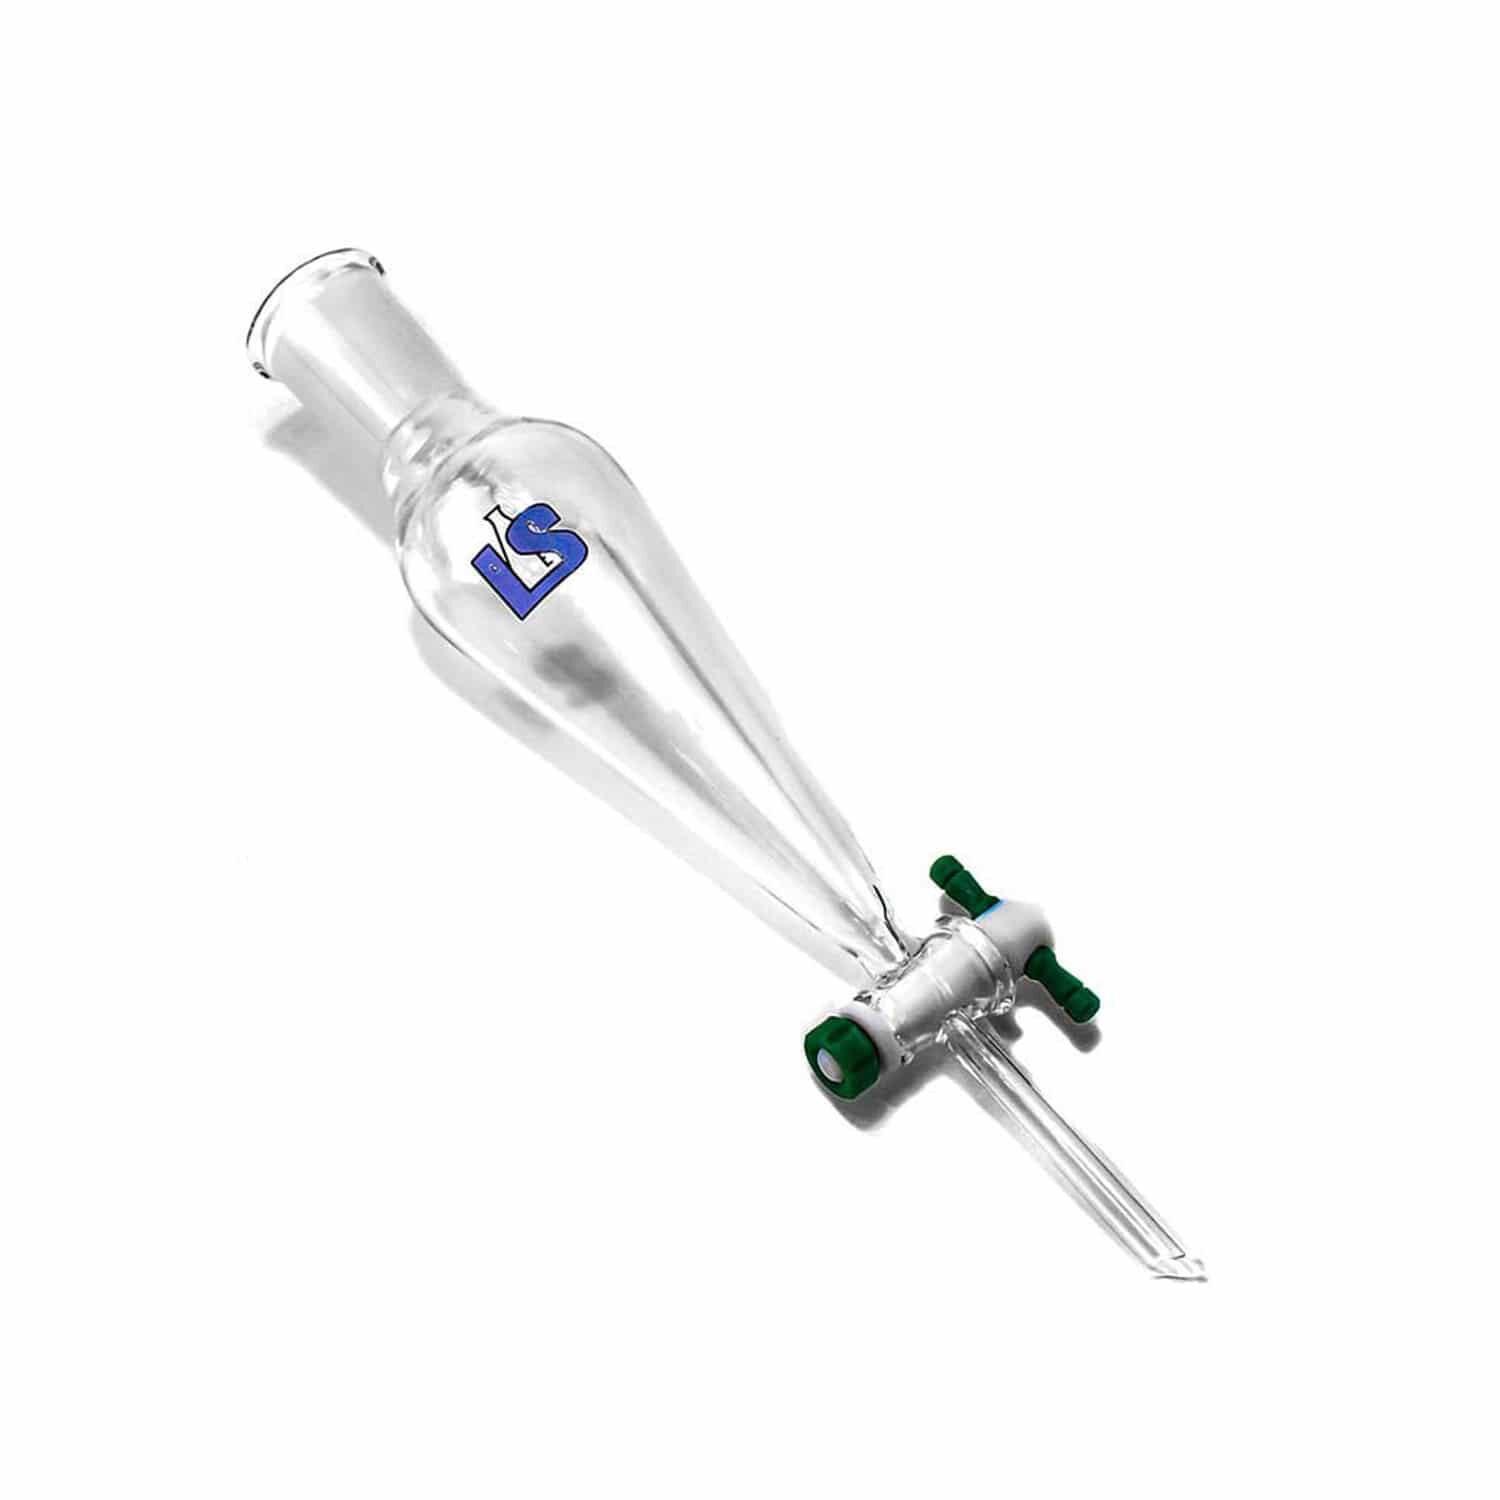 Product Separatory Funnel - Buy Scientific Glass Online image